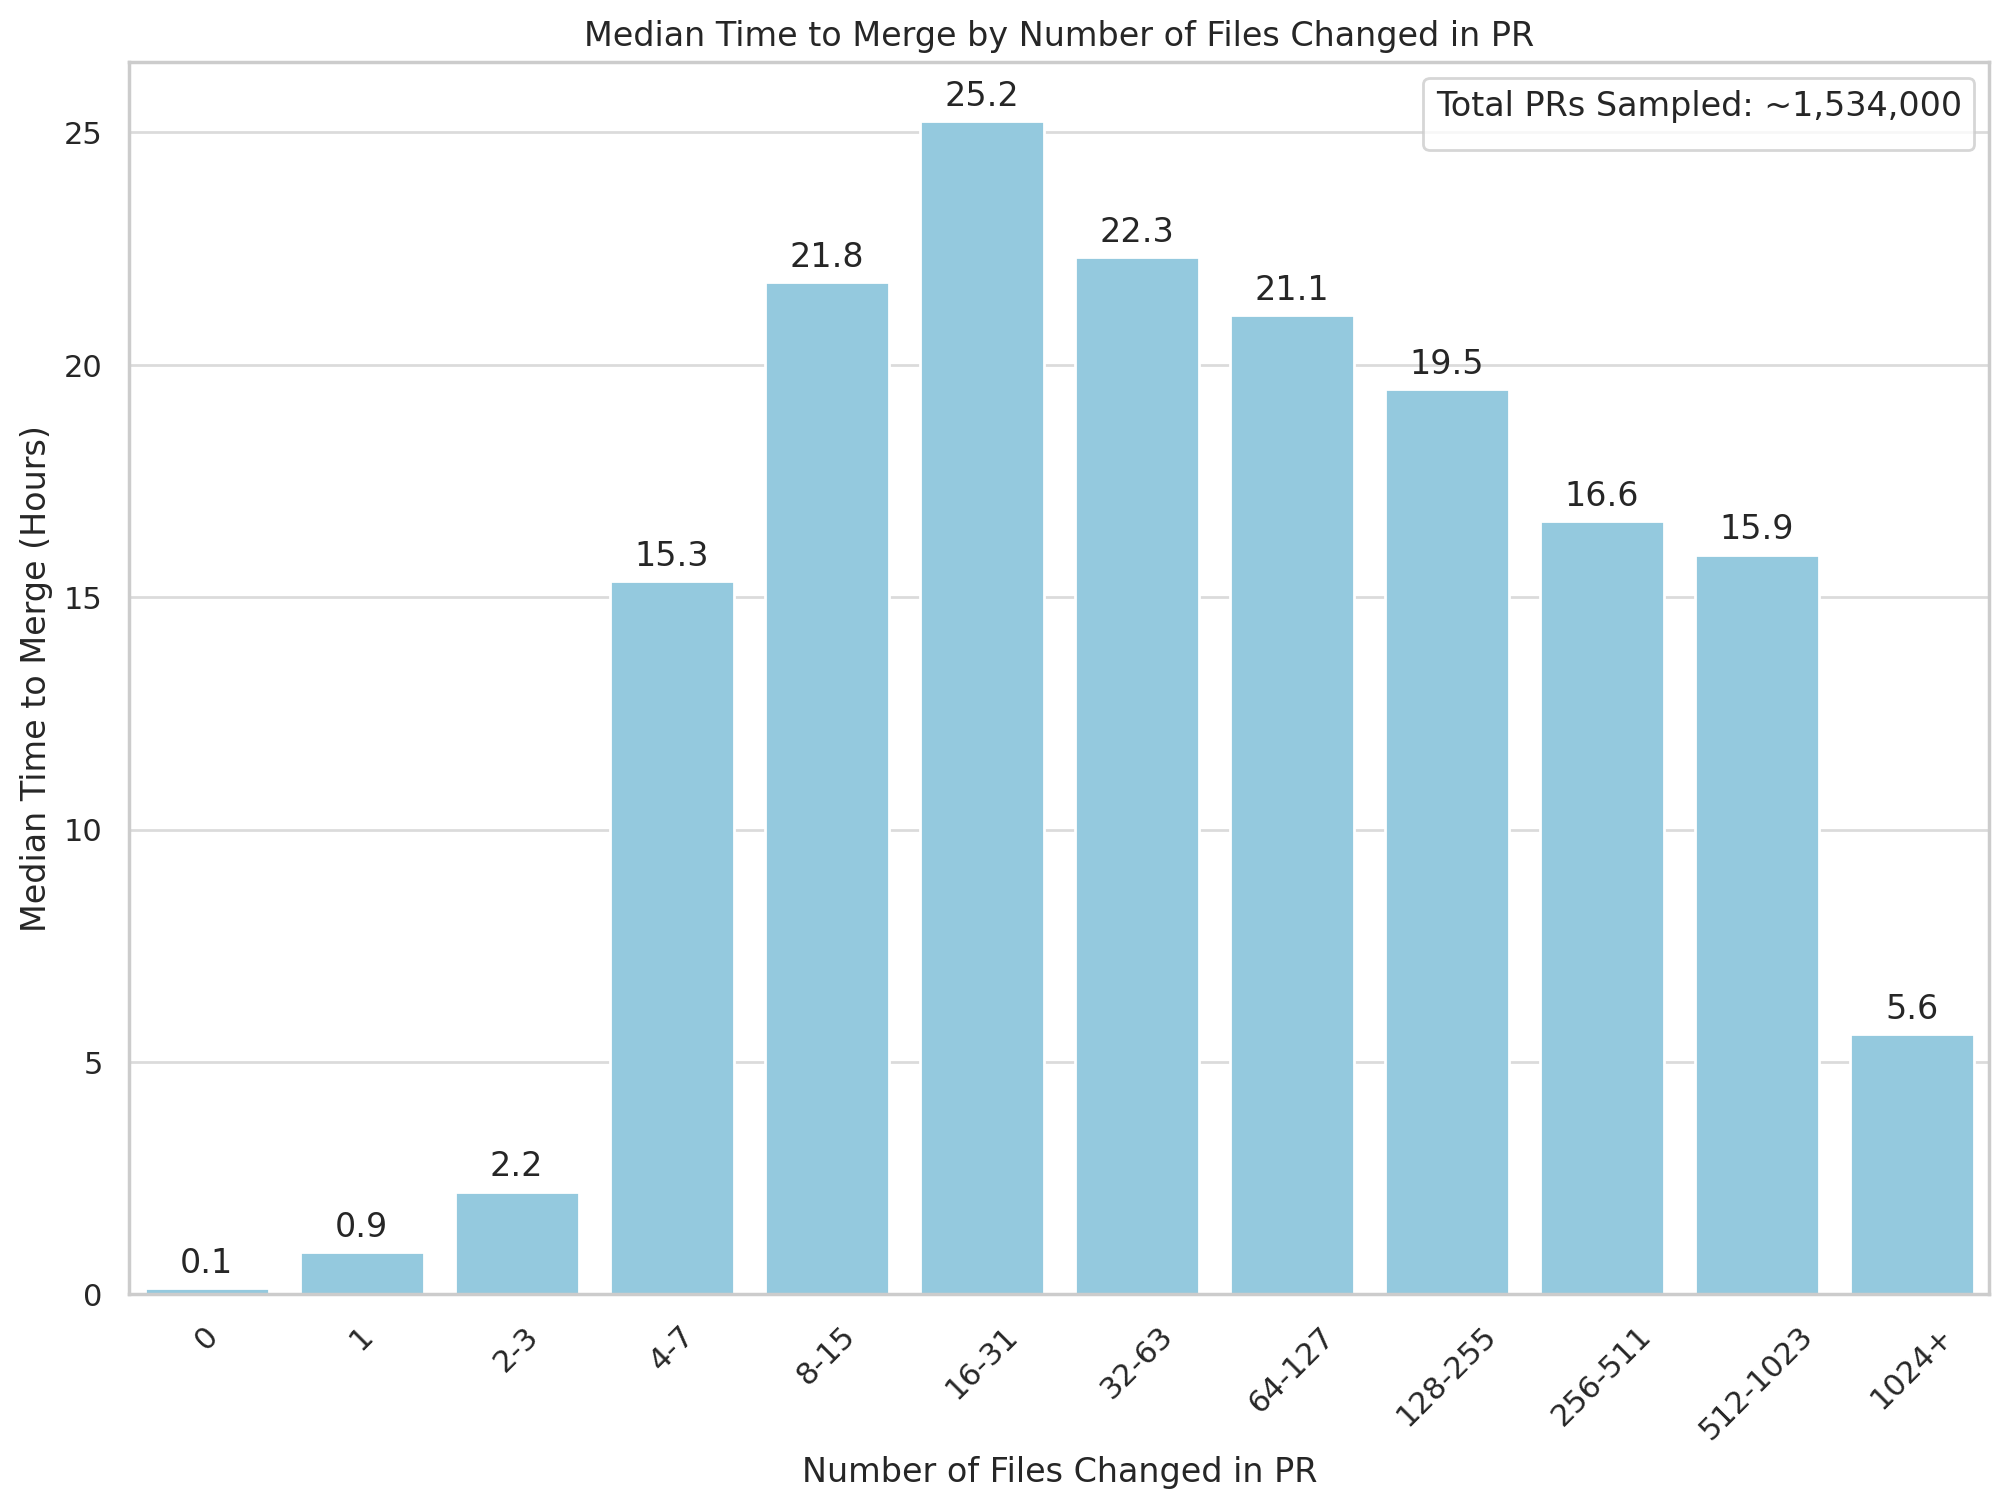 graph specifying median time to merge by number of files changed in PR